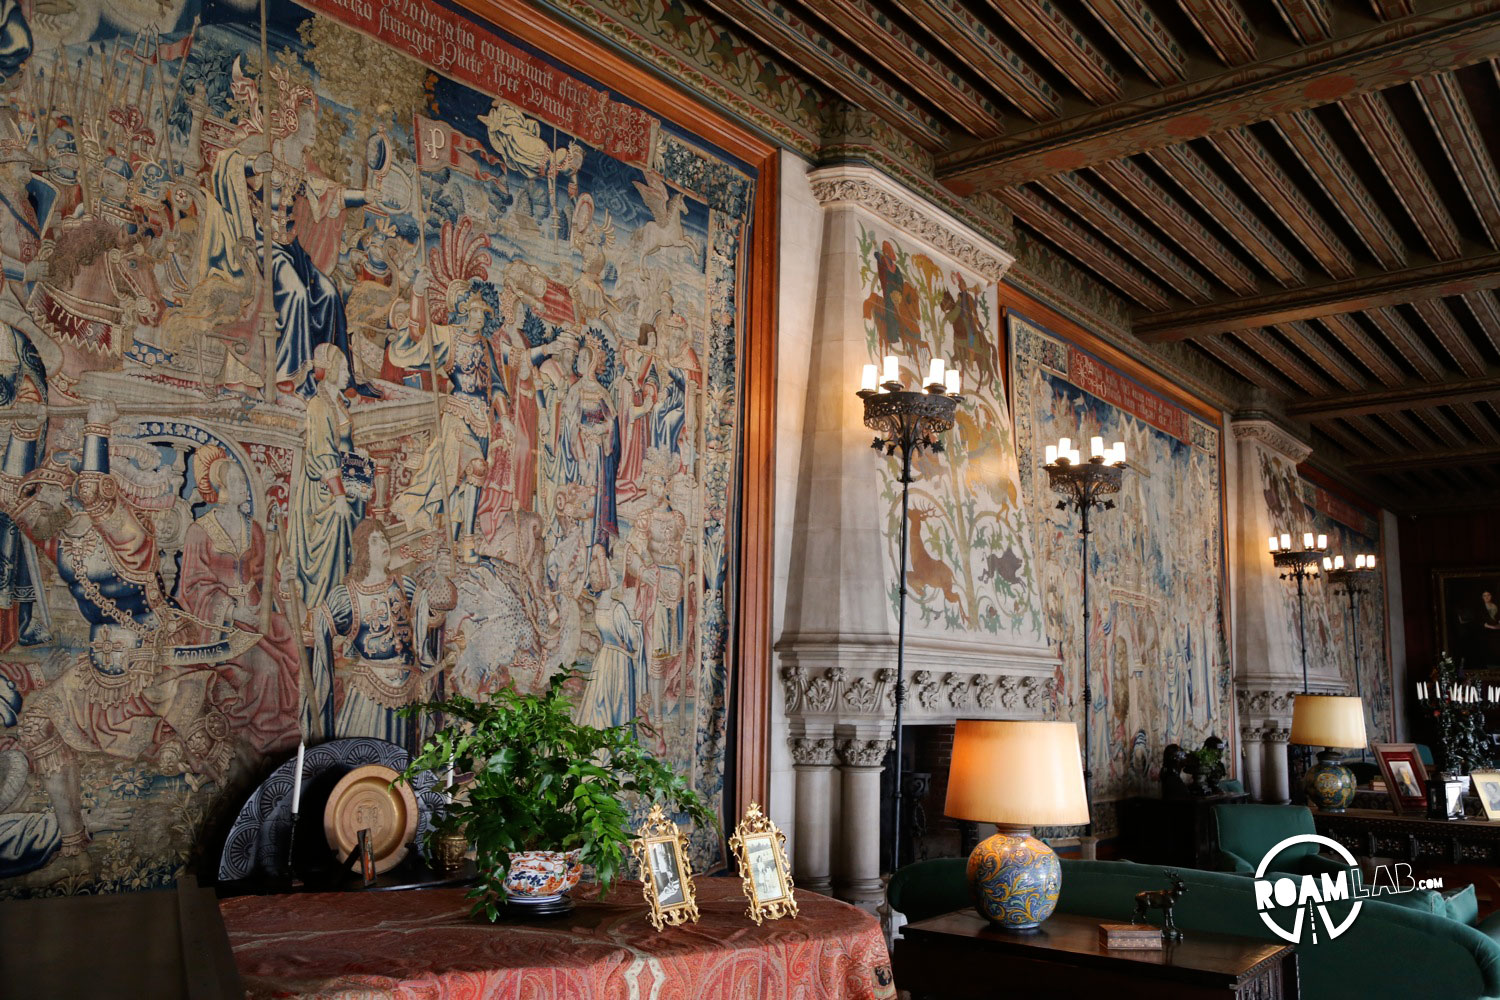 Intricate tapestries on the walls of the Biltmore depict some pretty bizarre scenes from the Bible.